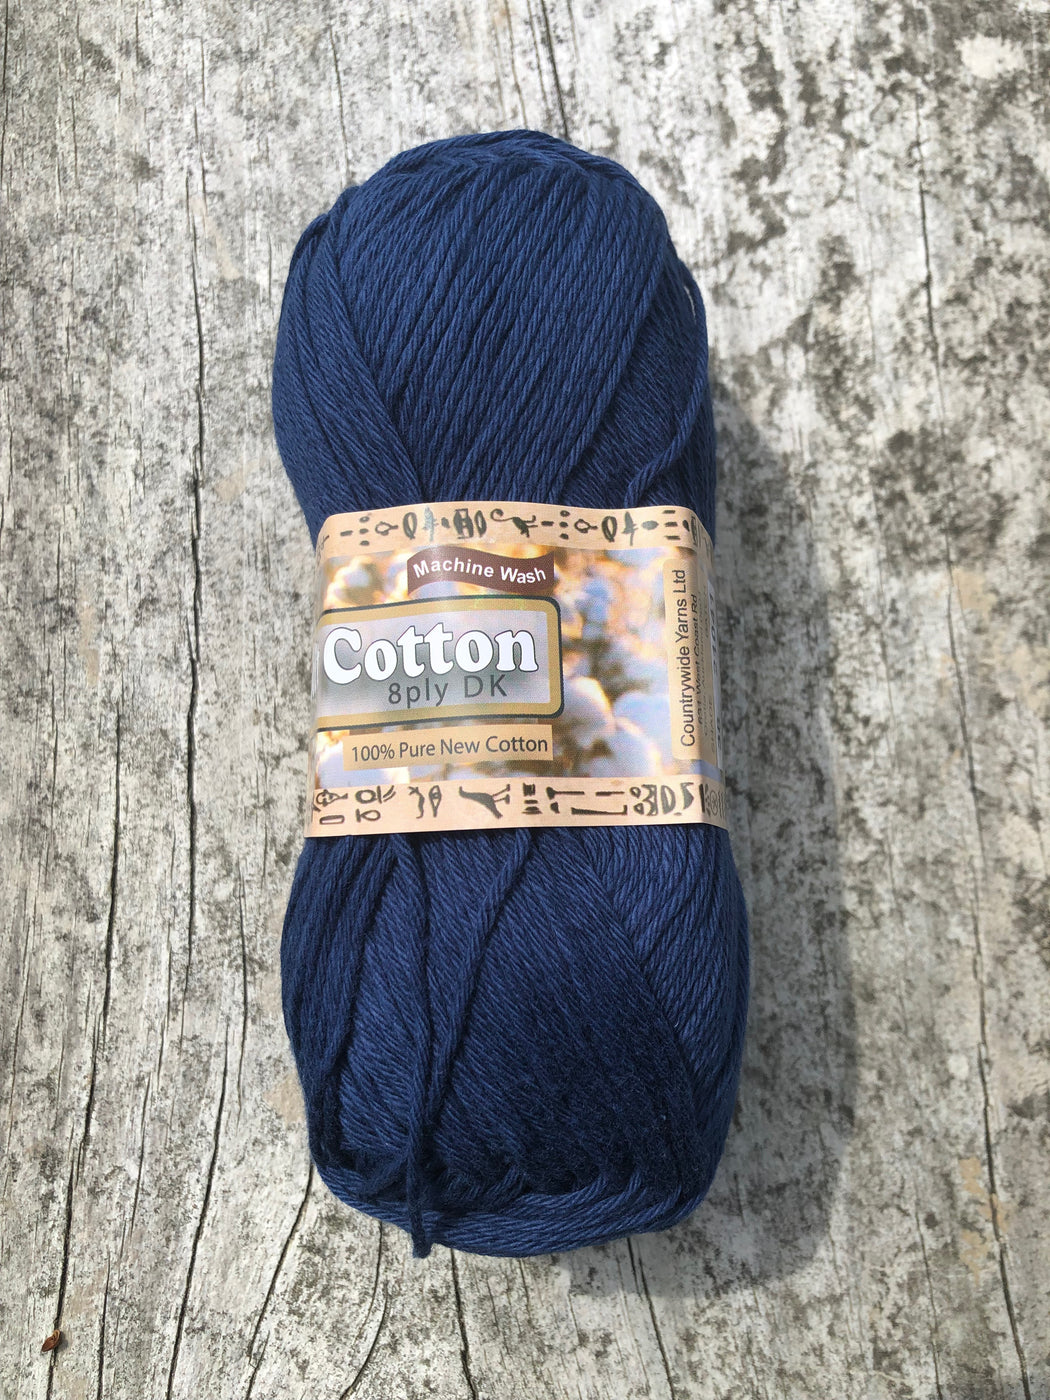 Countrywide Soft Cotton